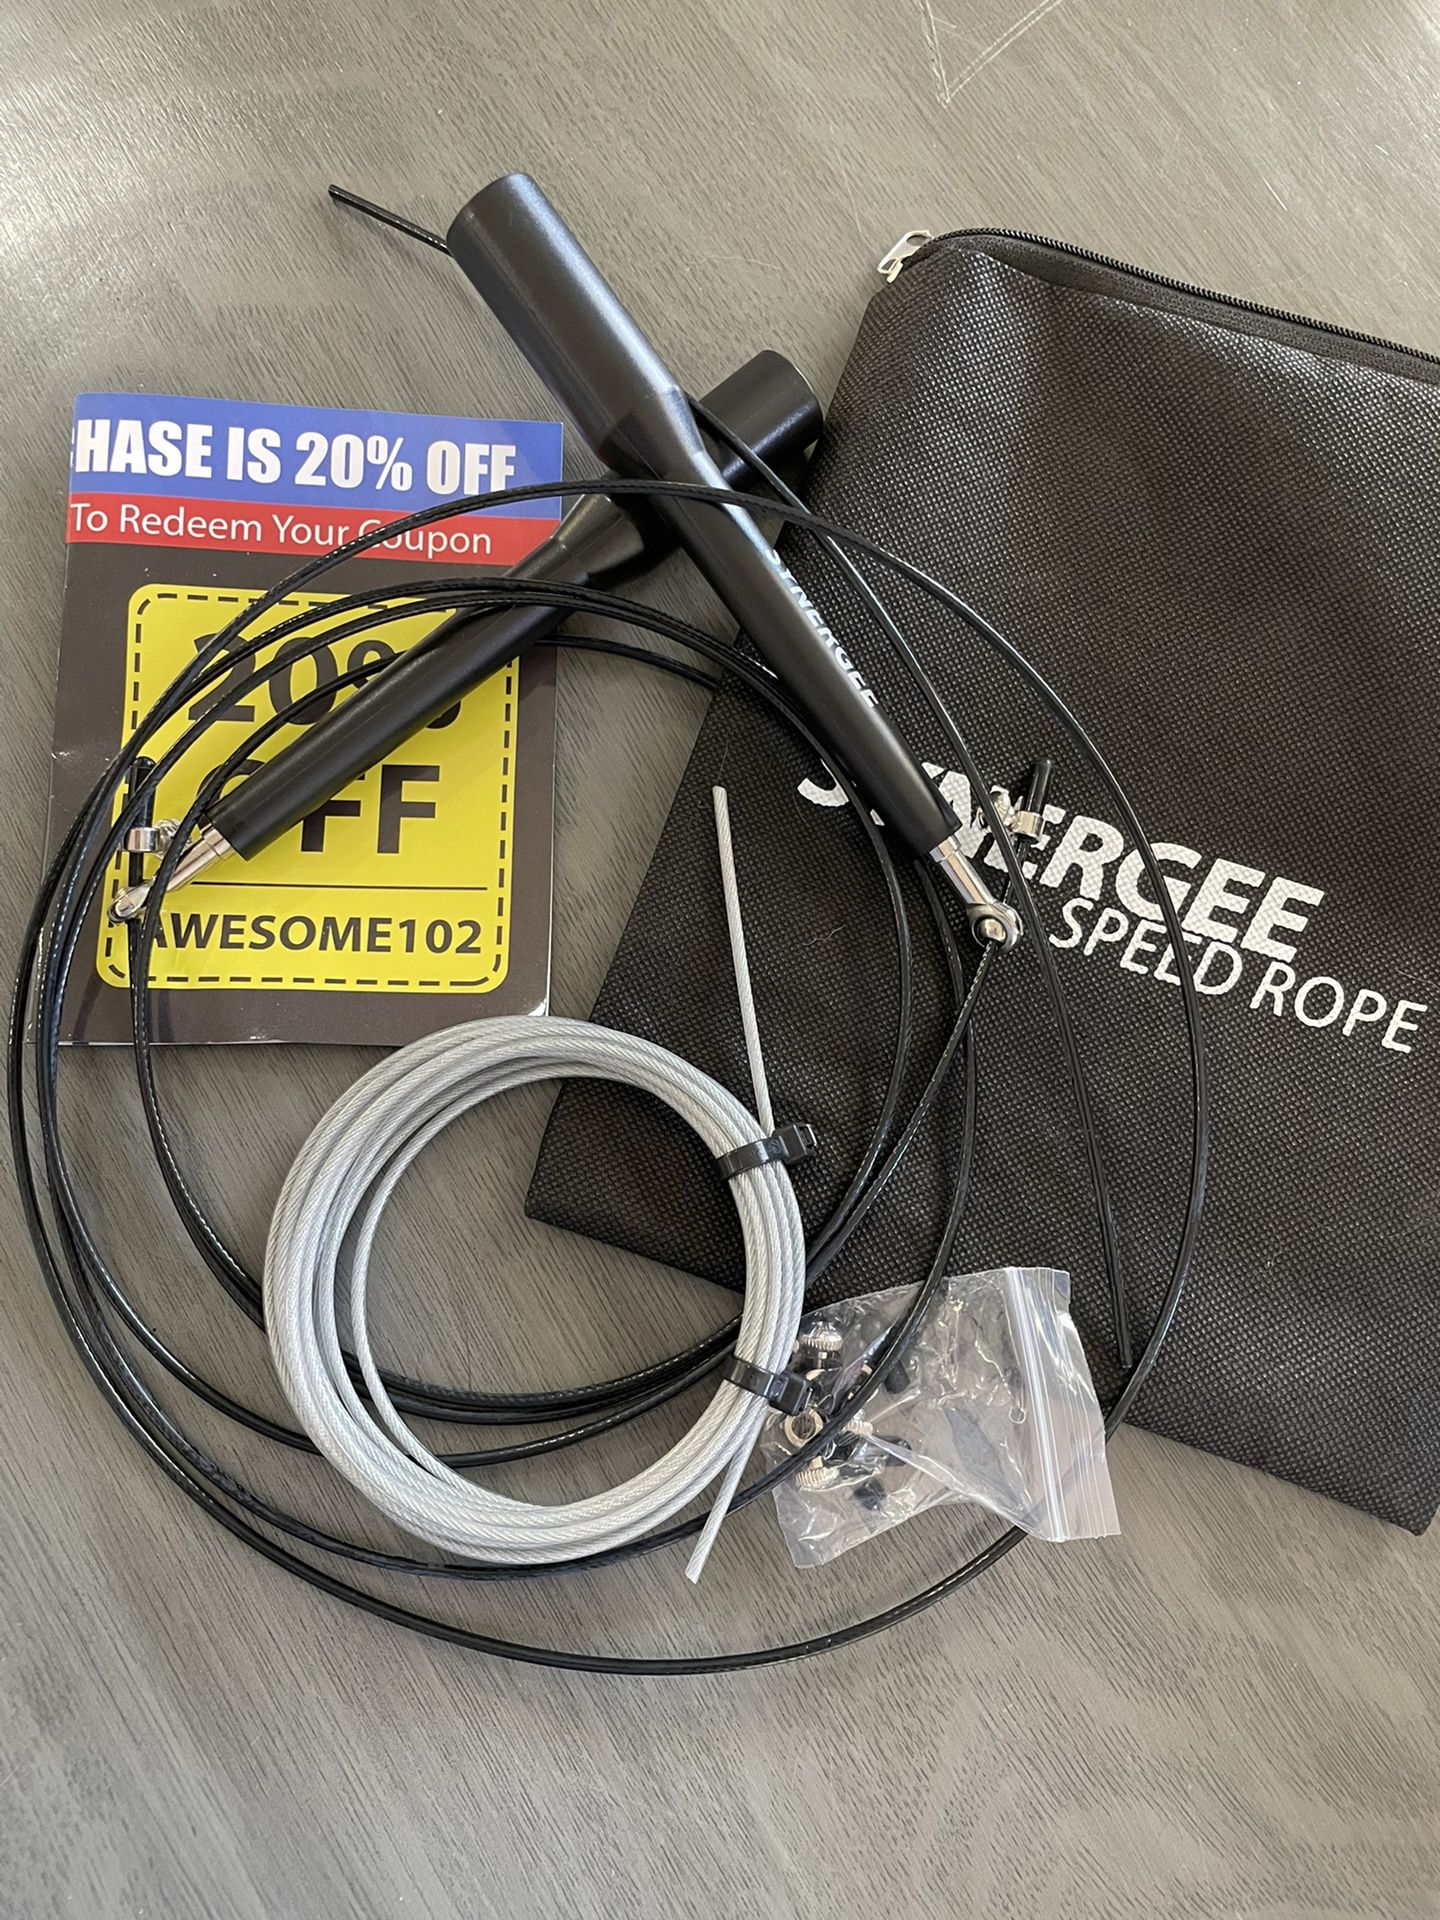 New Synergee Speed Rope Jump Rope